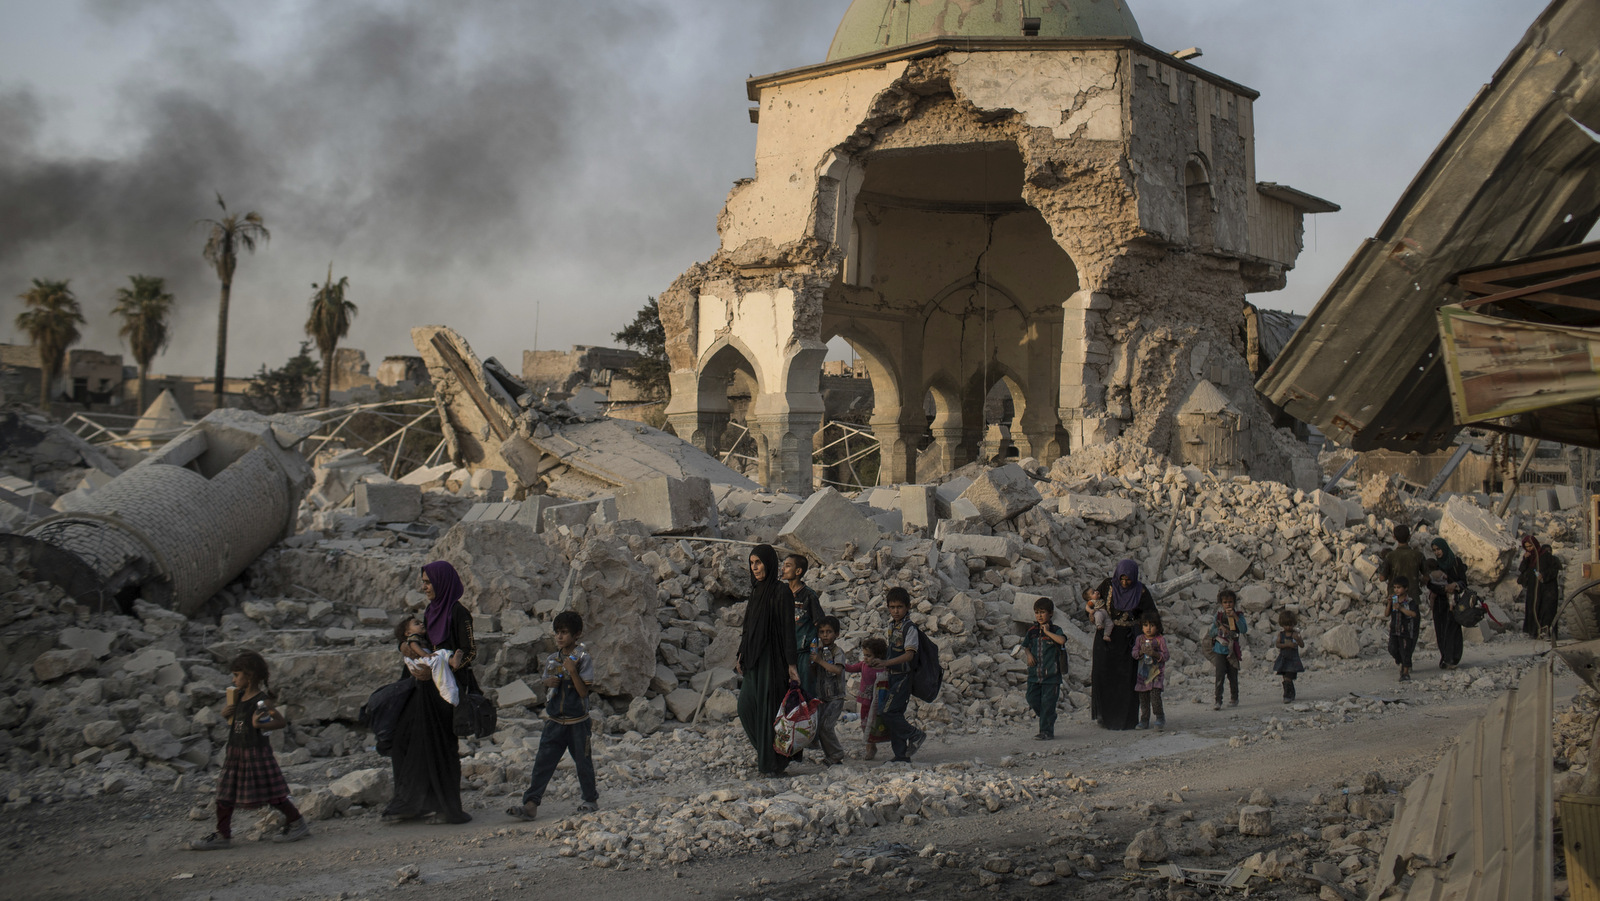 Fleeing Iraqi civilians walk past the heavily damaged al-Nuri mosque as Iraqi forces continue their advance against ISIS militants in the Old City of Mosul, Iraq, July 4, 2017 (AP/Felipe Dana)